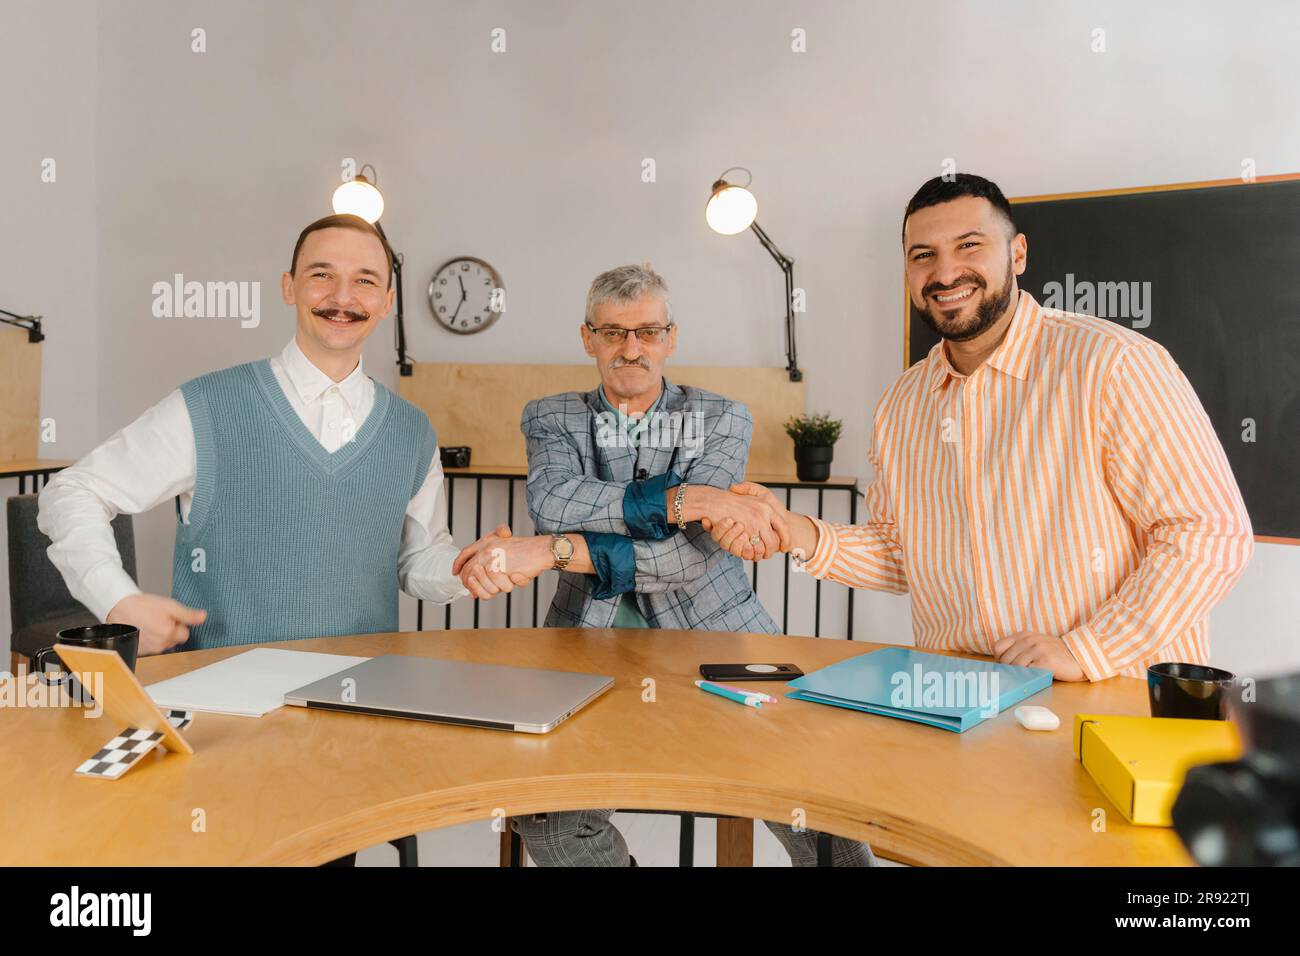 Three male colleagues of different ages and nationalities shaking hands in studio Stock Photo